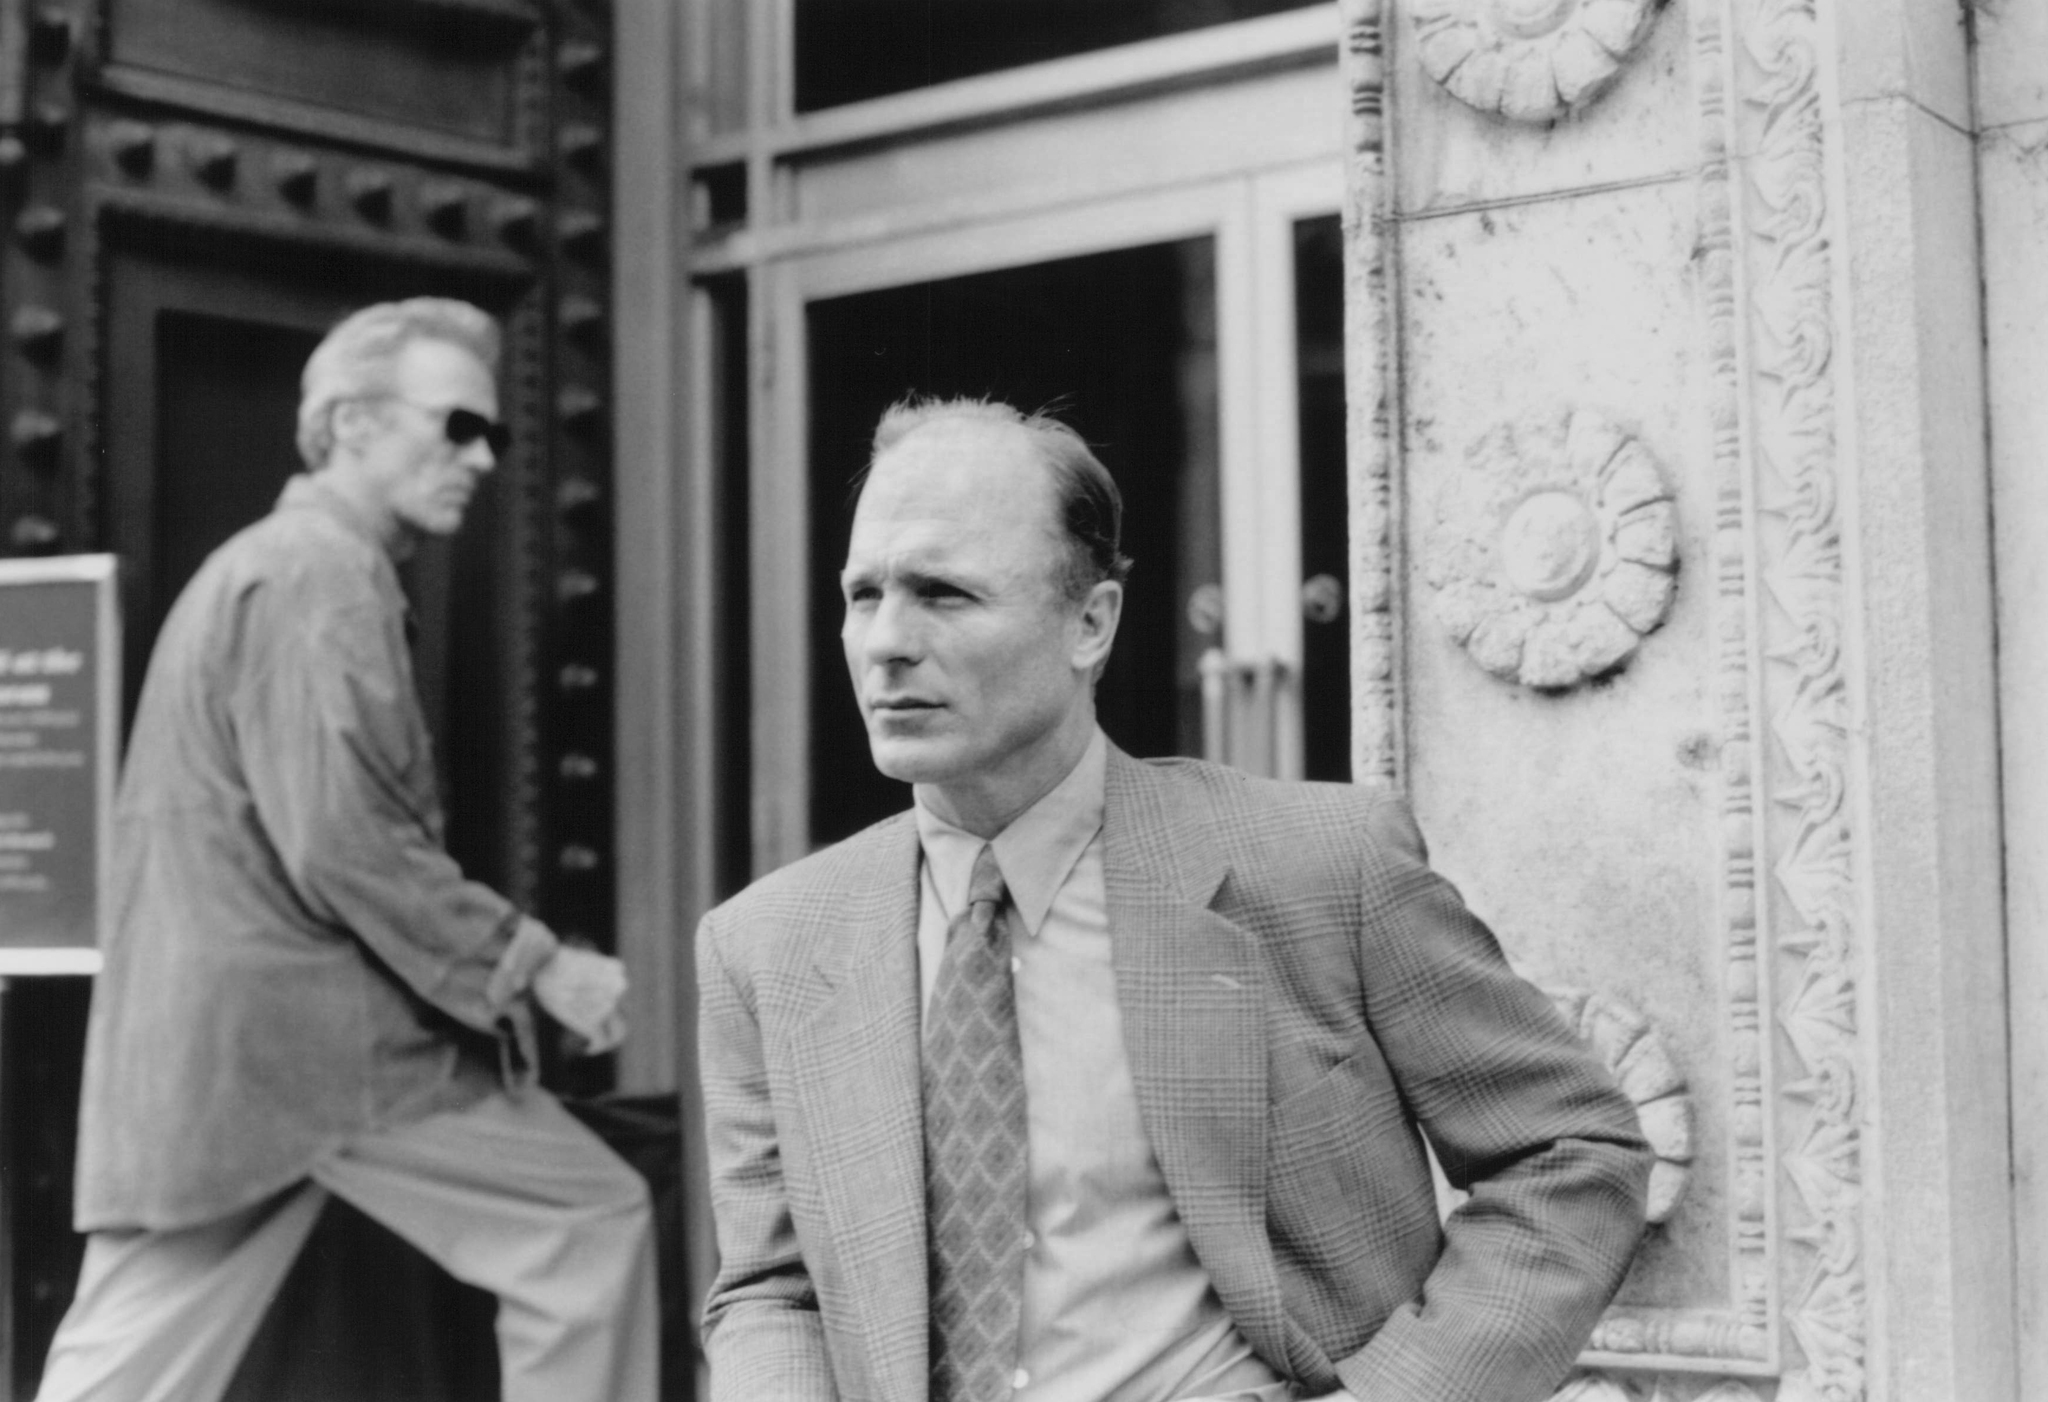 Still of Clint Eastwood and Ed Harris in Absolute Power (1997)